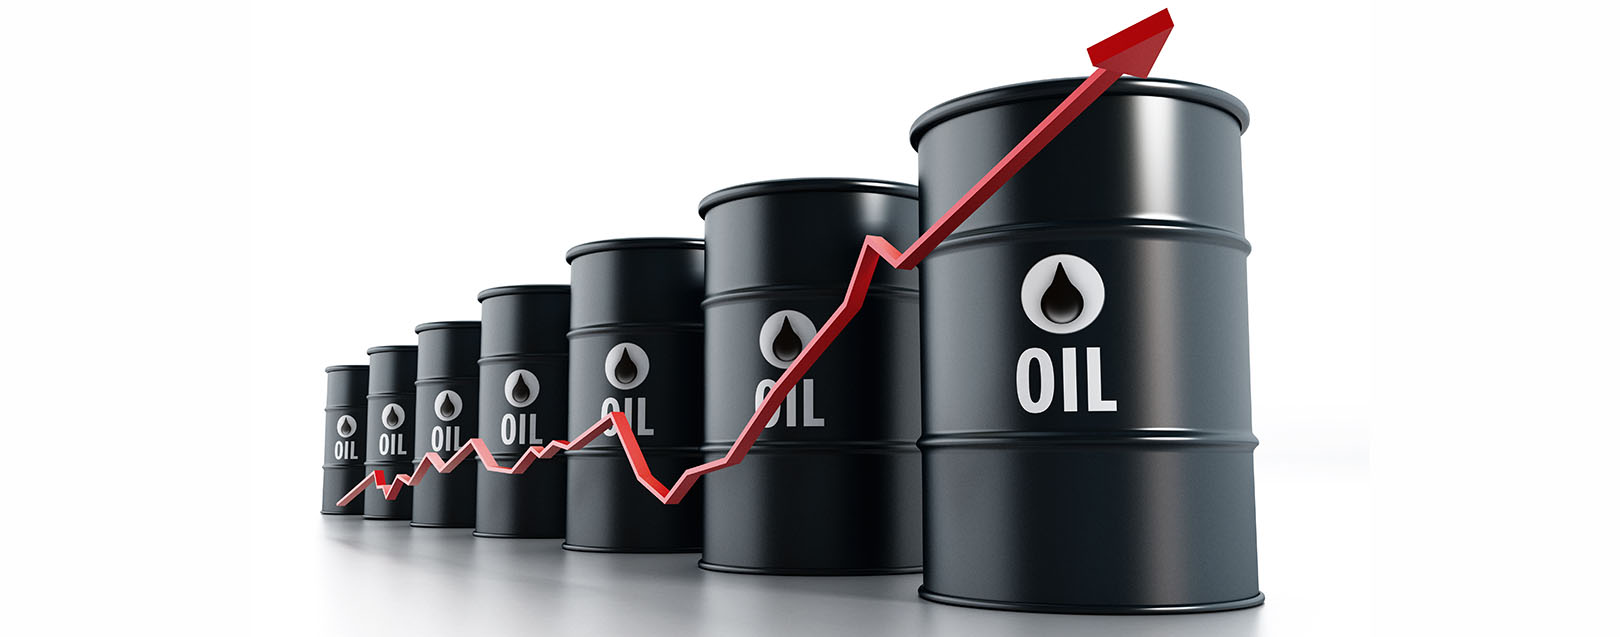 India’s oil consumption to outpace China’s this year, Platts Analytics